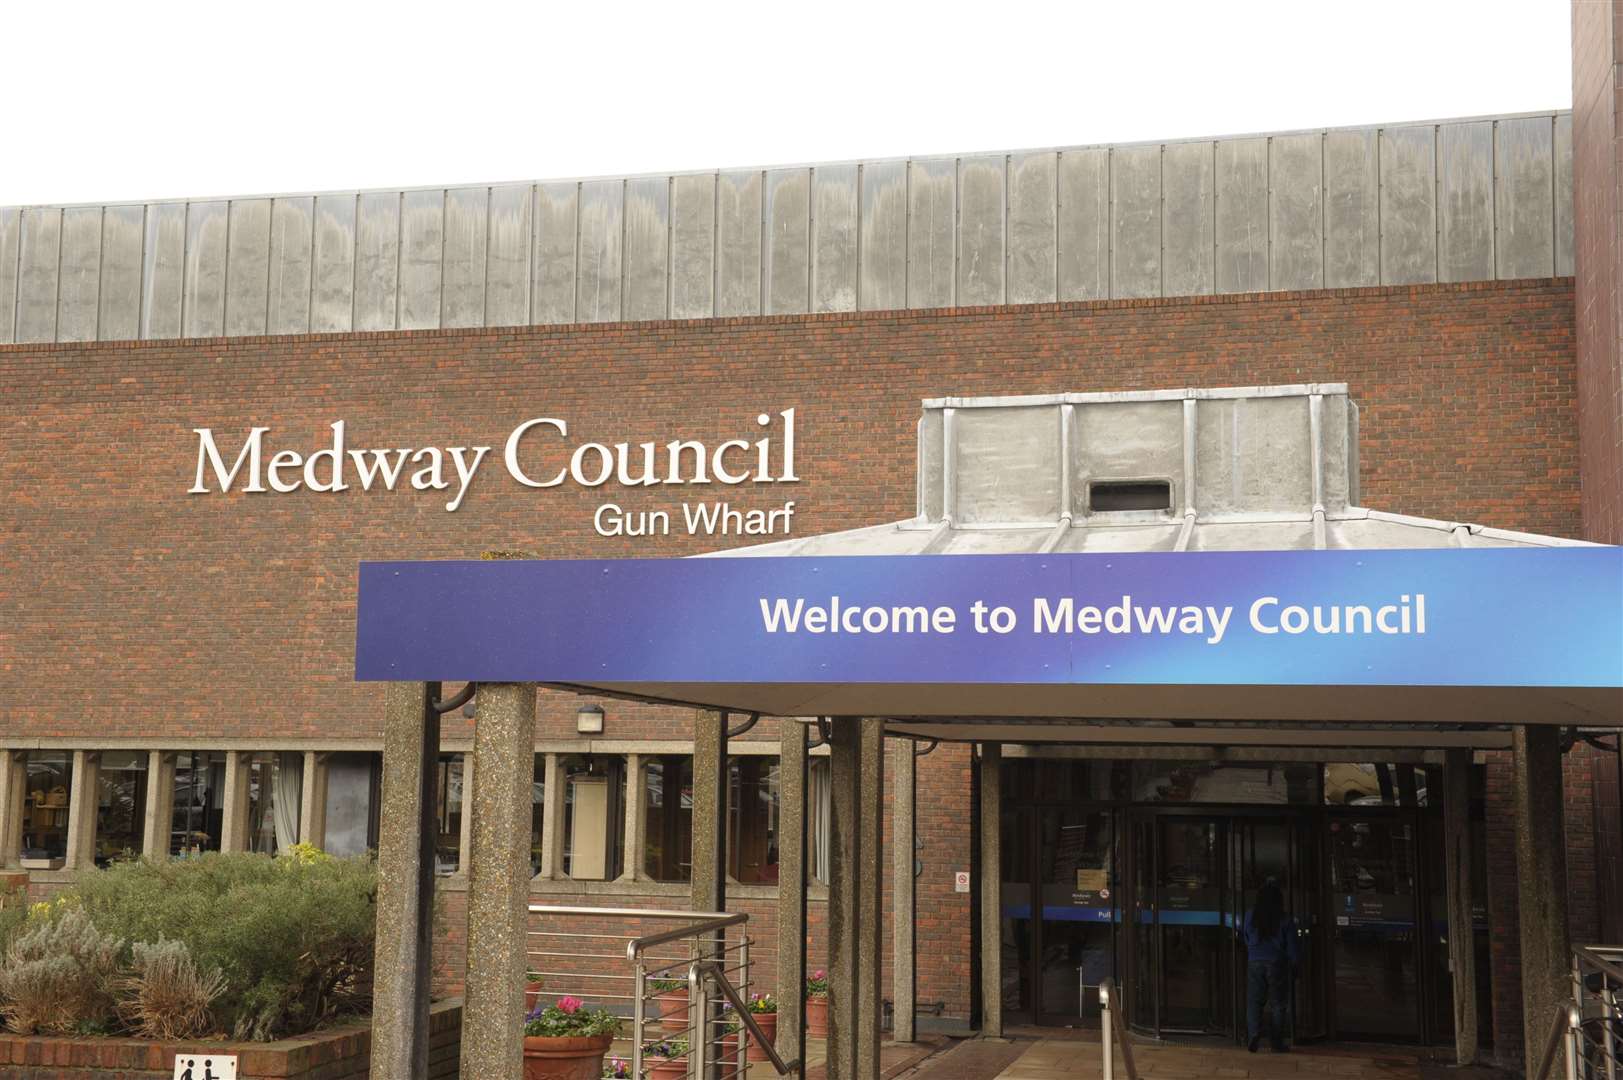 Medway Council's offices at Gun Wharf, Dock Road, Chatham.Picture: Steve Crispe